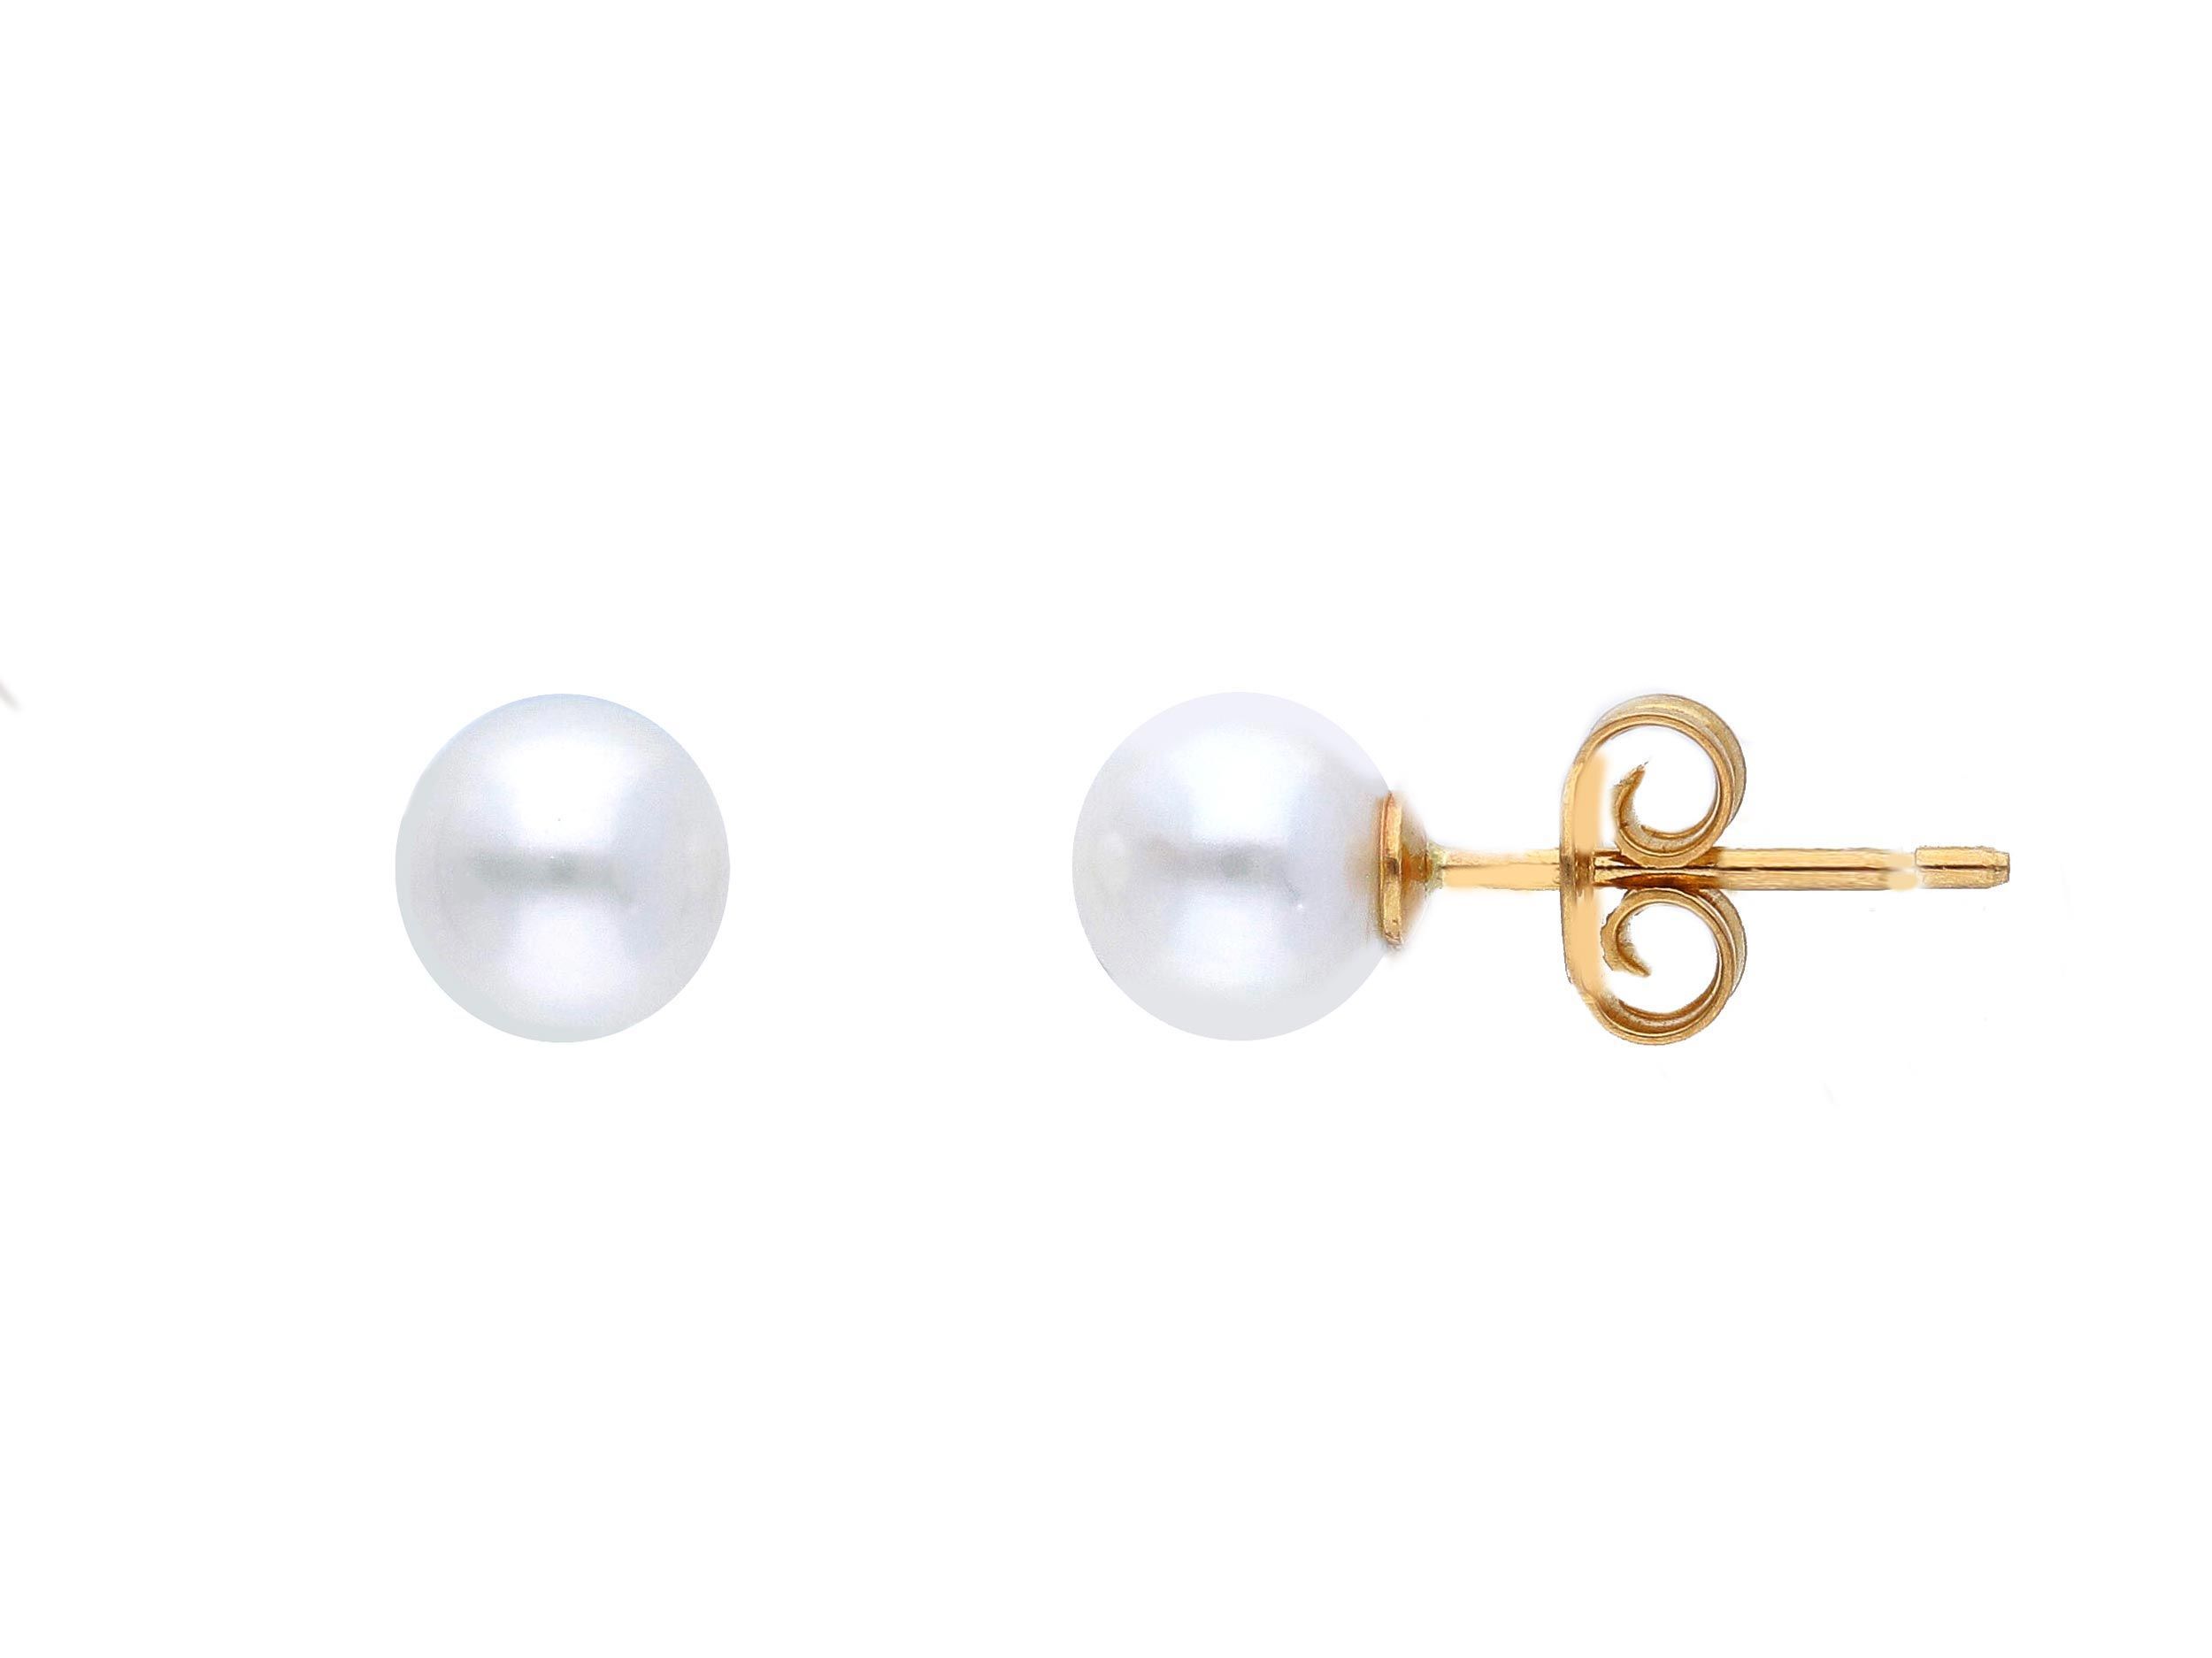 Golden earrings 9k with pearls (code S174286)